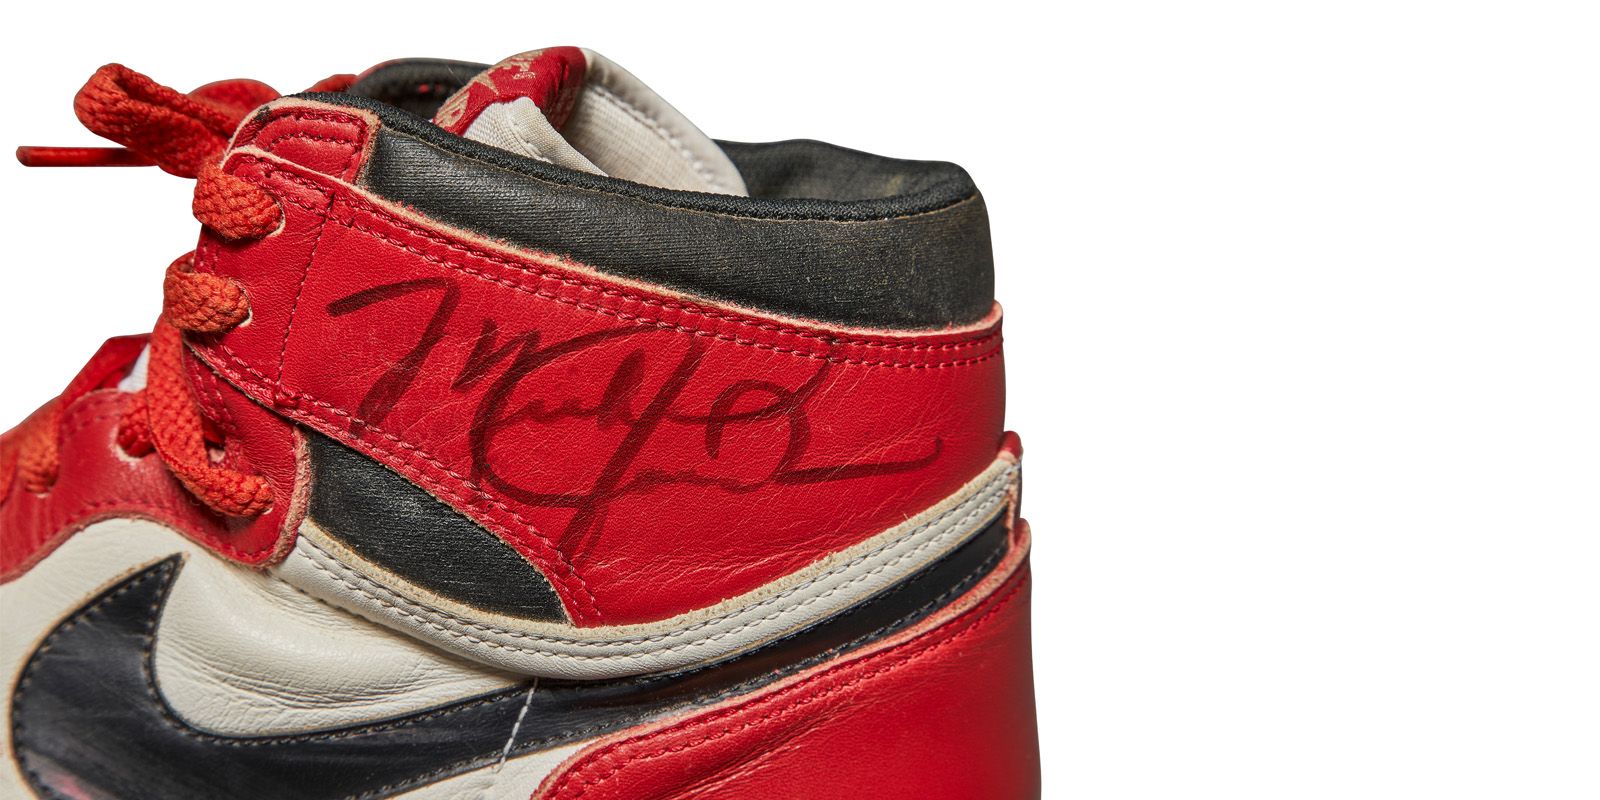 Sotheby's Has Assembled an Auction of Over 100 Historic Nike